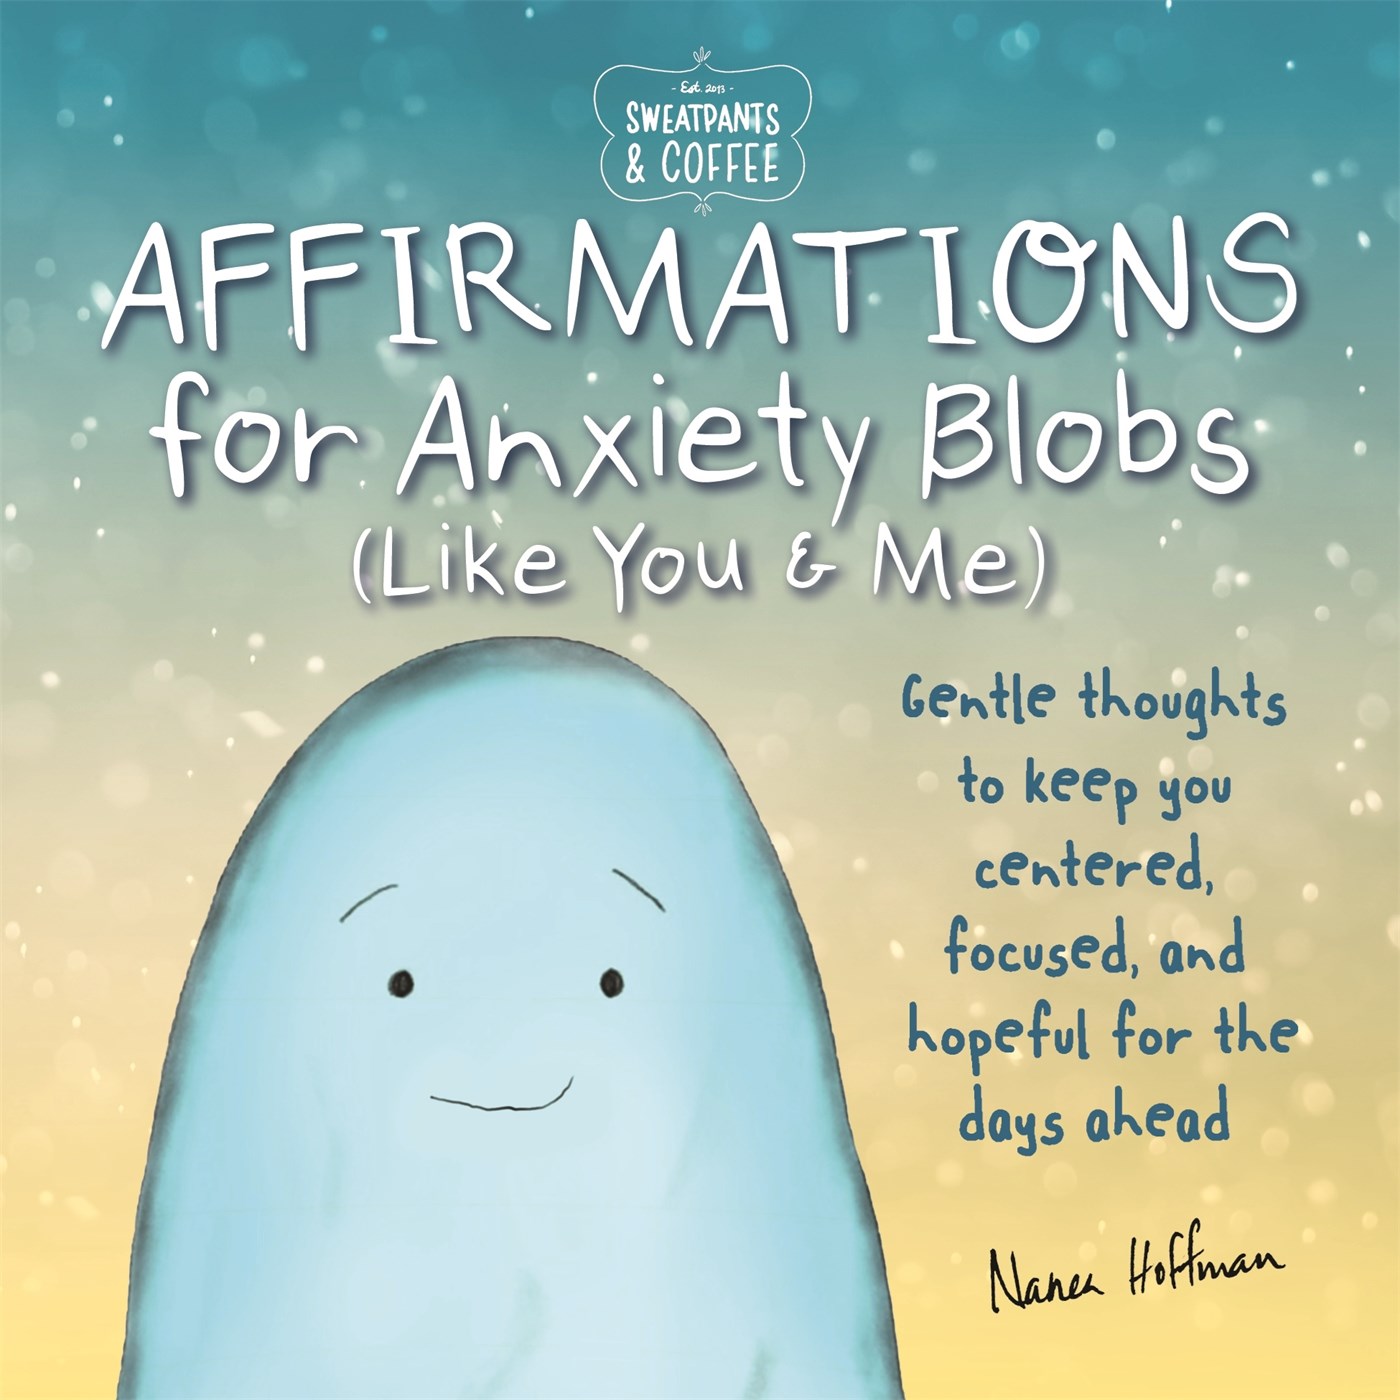 Sweatpants & Coffee: Affirmations for Anxiety Blobs (Like You and Me) : Gentle thoughts to keep you centered, focused and hopeful for the days ahead